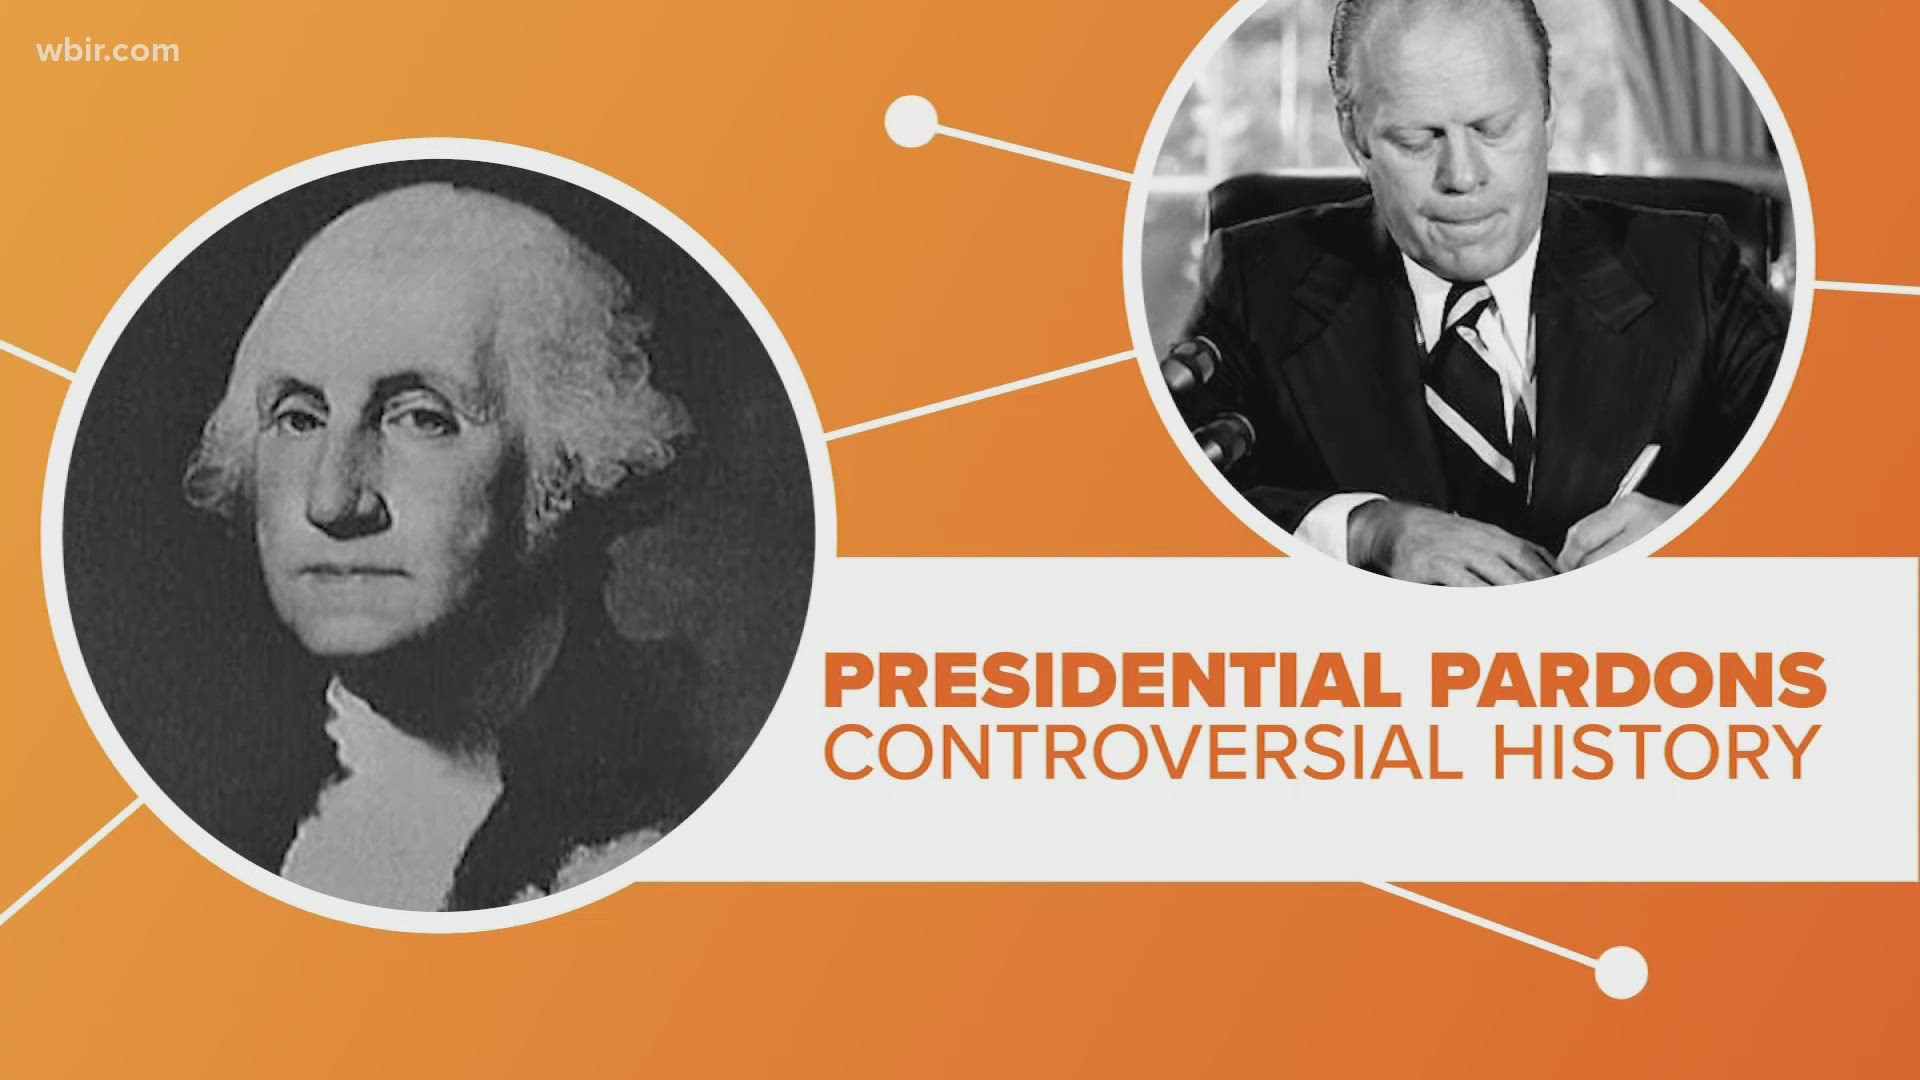 Presidential pardons are as old as the office itself but the power to pardon has always come with controversy.